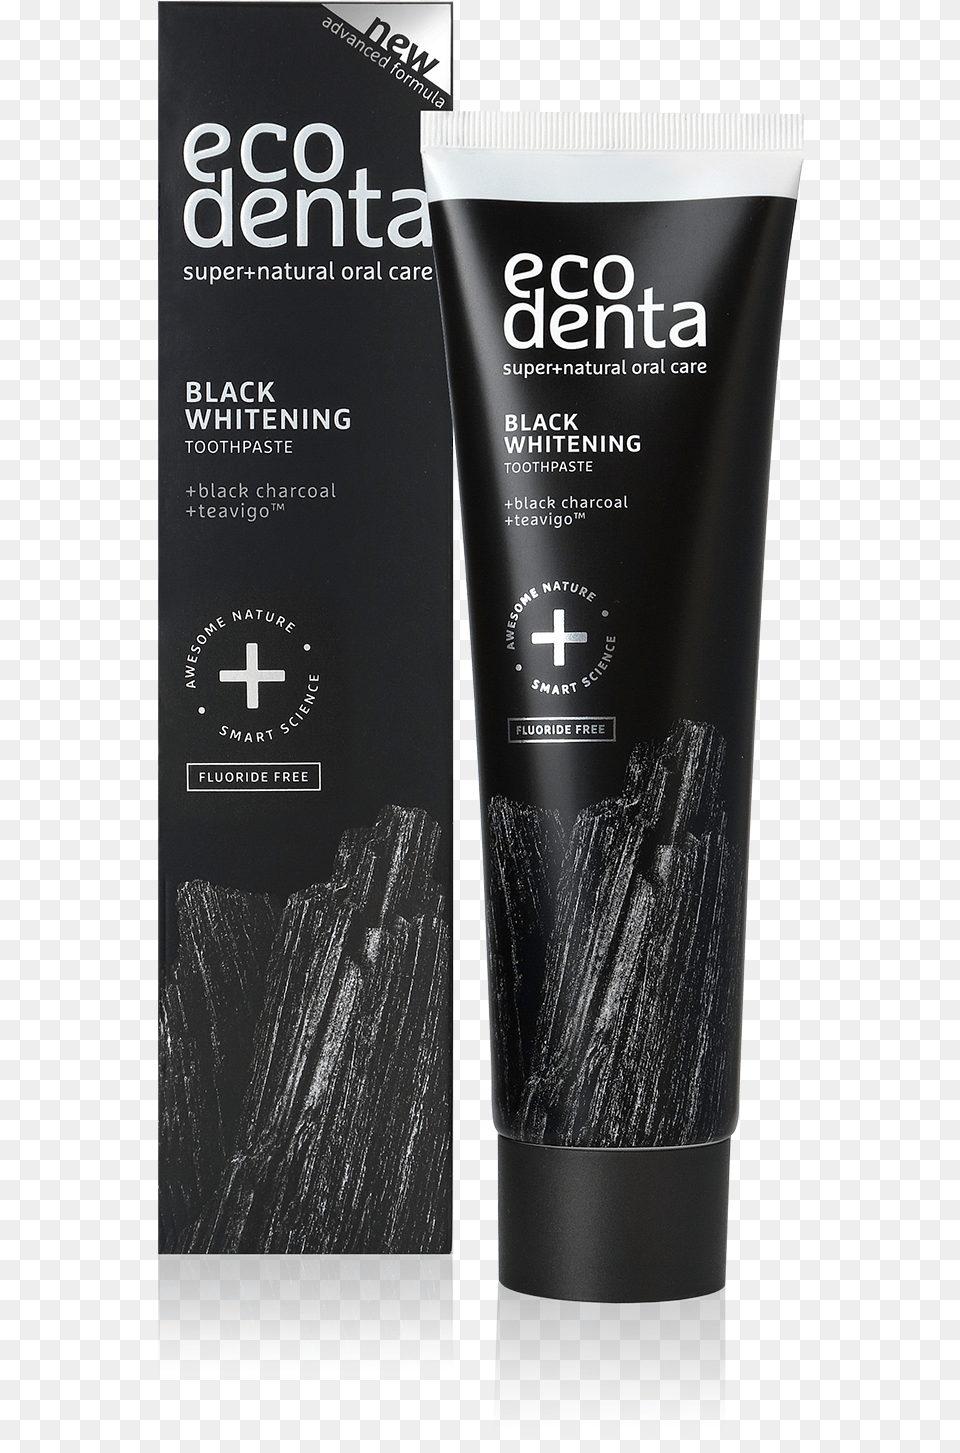 Ecodenta Black Whitening Toothpaste, Bottle, Aftershave Png Image